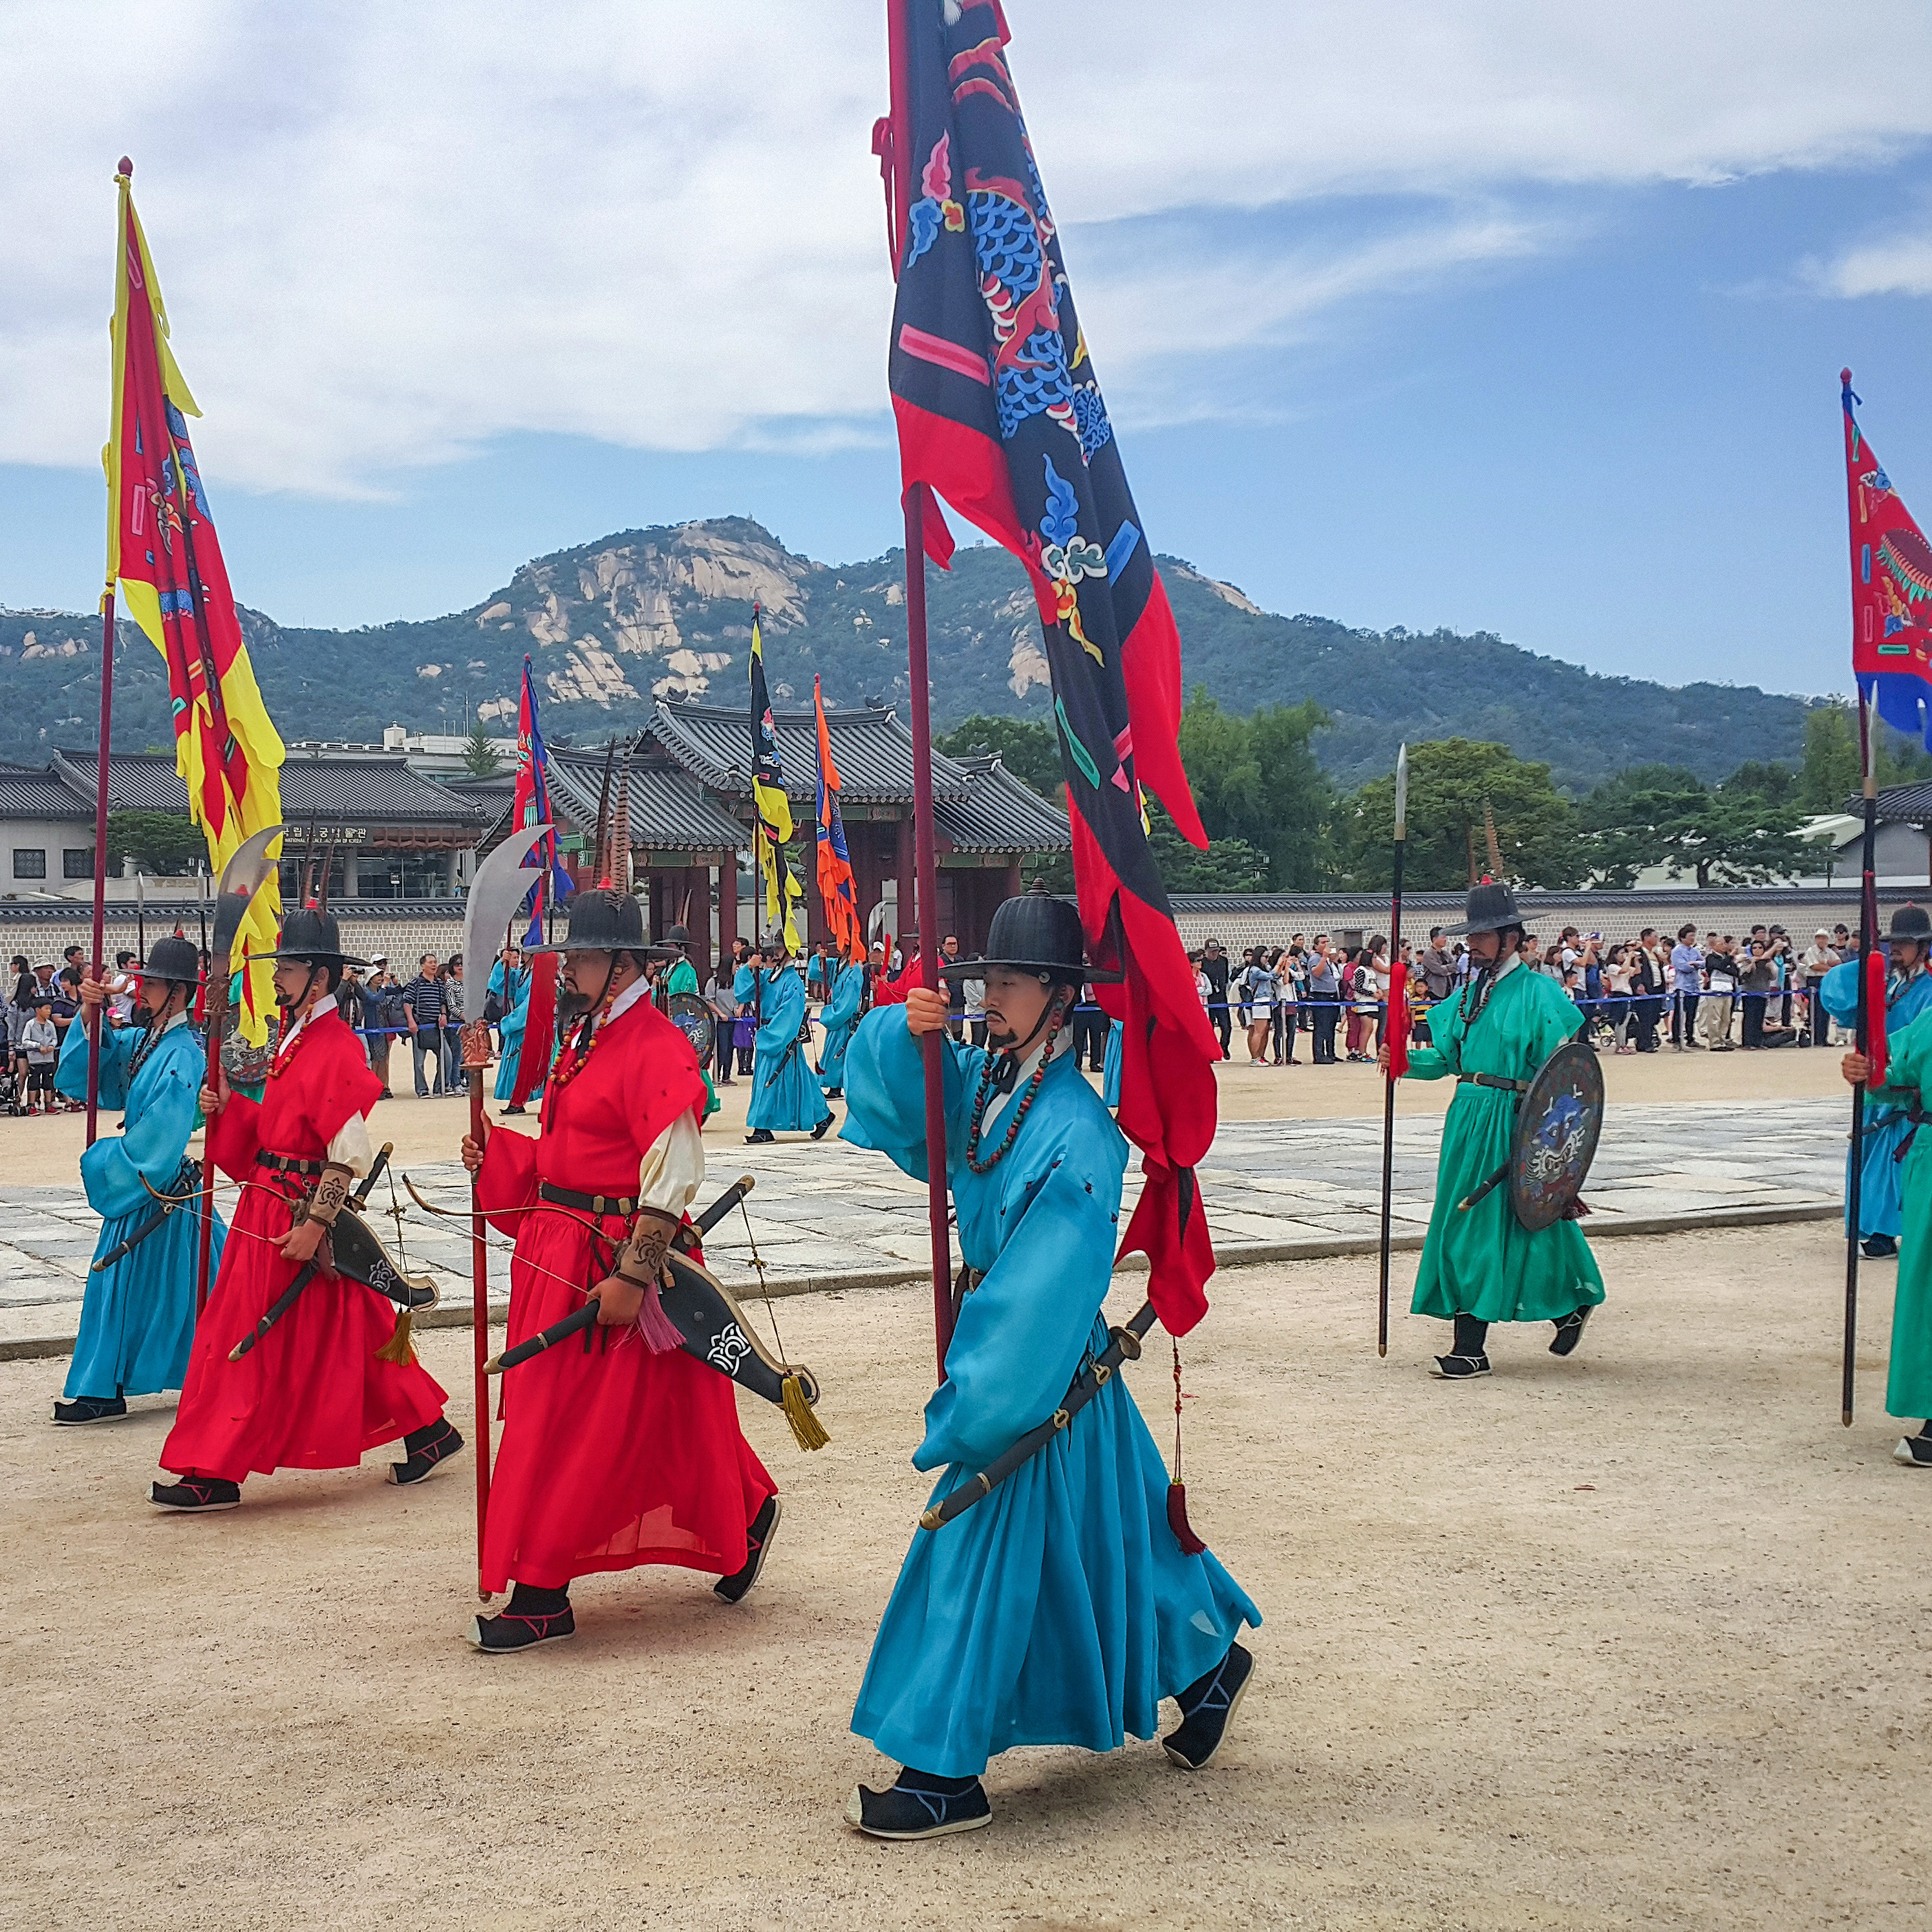 Procession of guards in brightly coloured traditional costume carrying flags